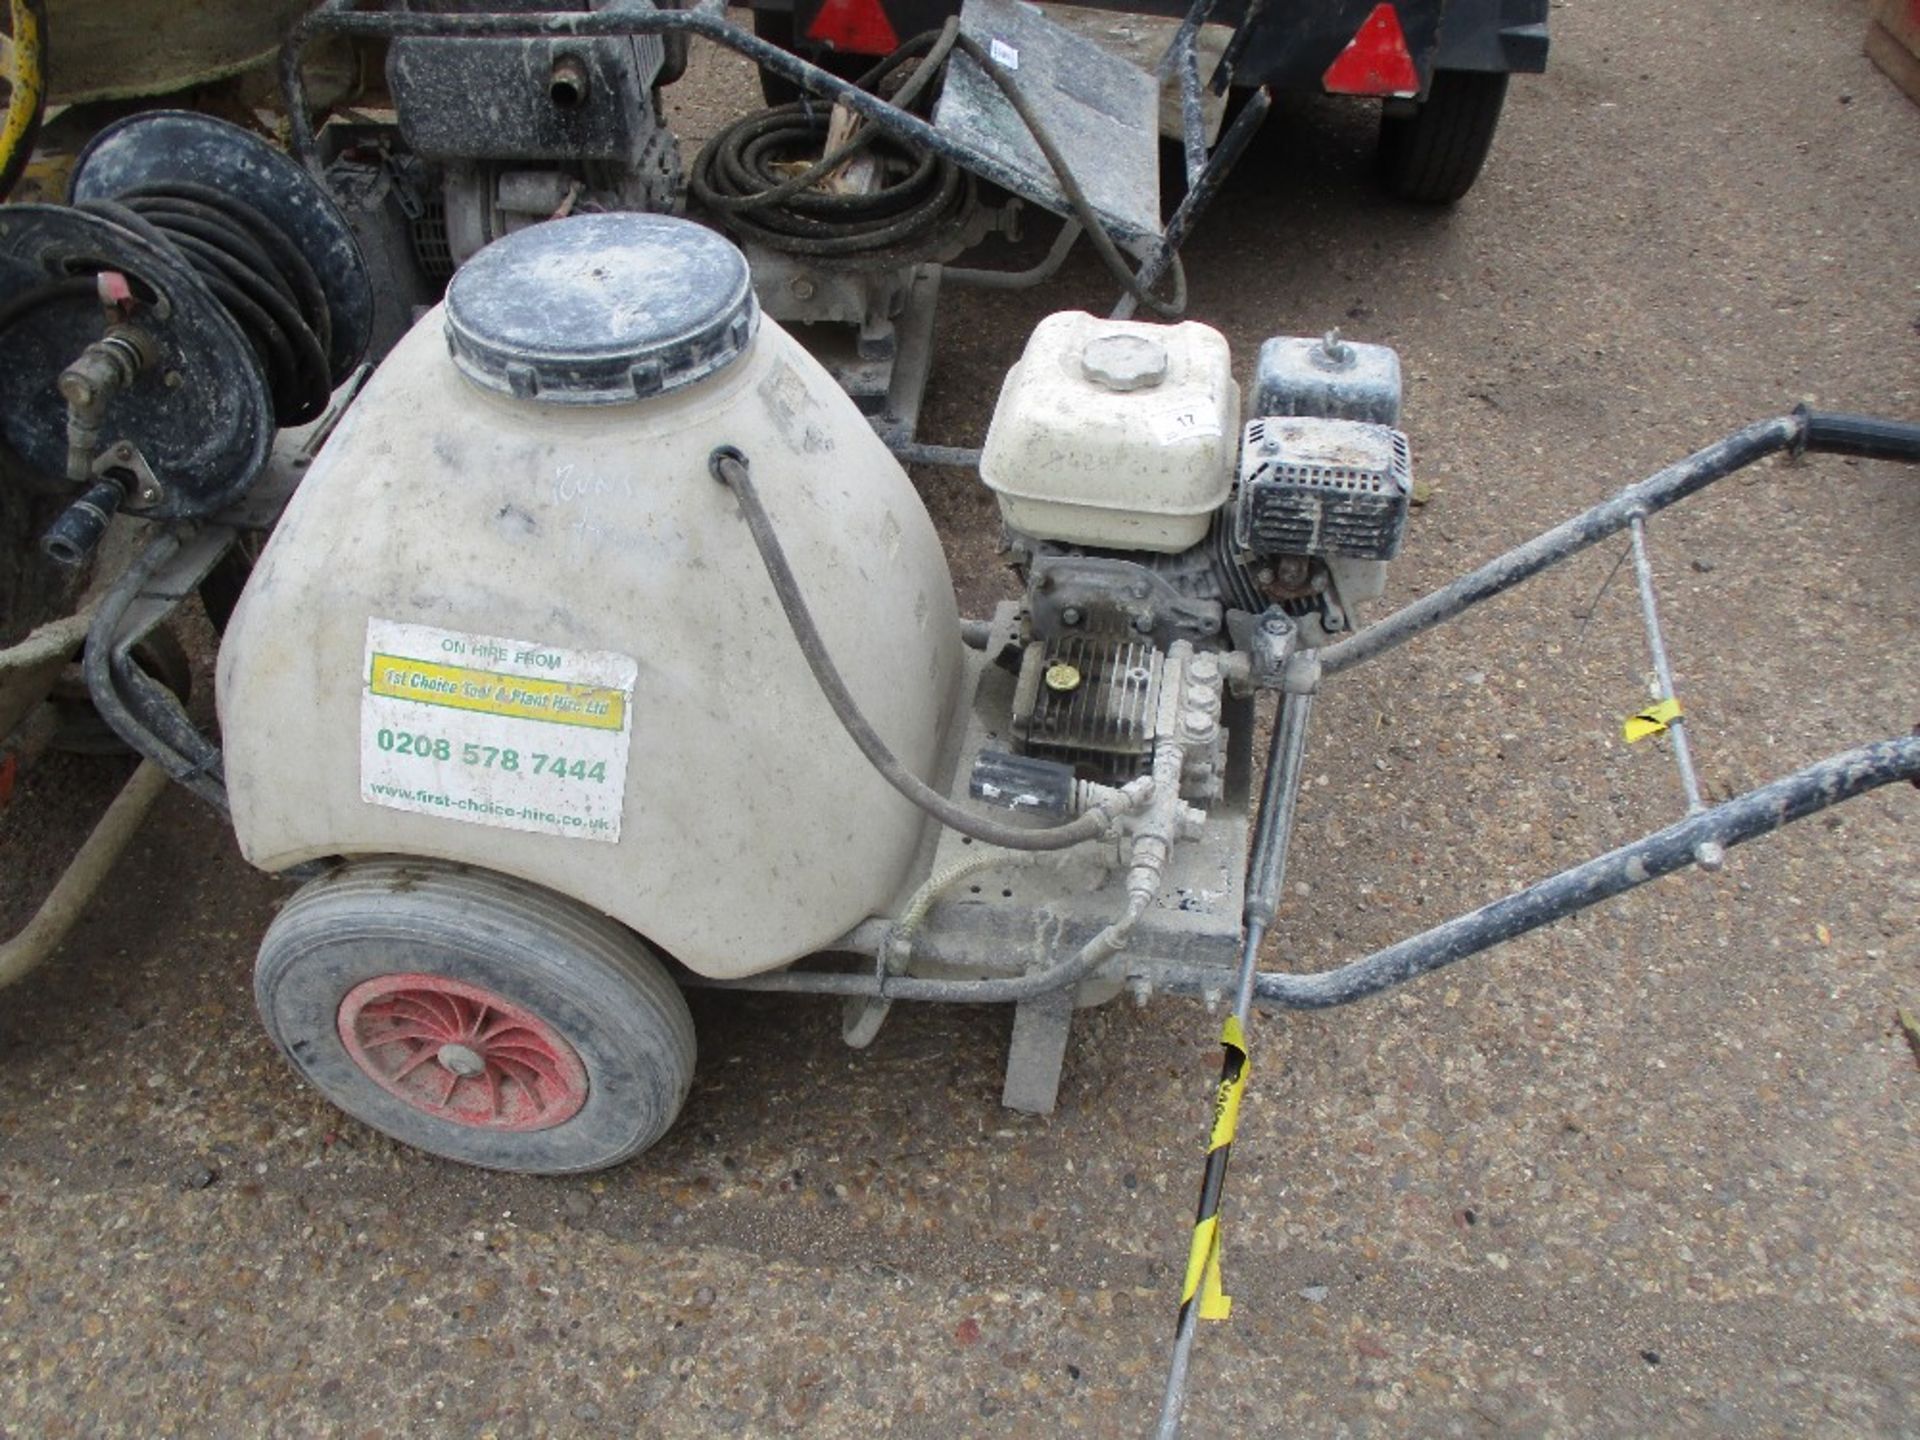 HONDA ENGINED PRESSURE WASHER BARROW, PETROL ENGINE. WHEN TESTED WAS SEEN TO RUN AND PUMP